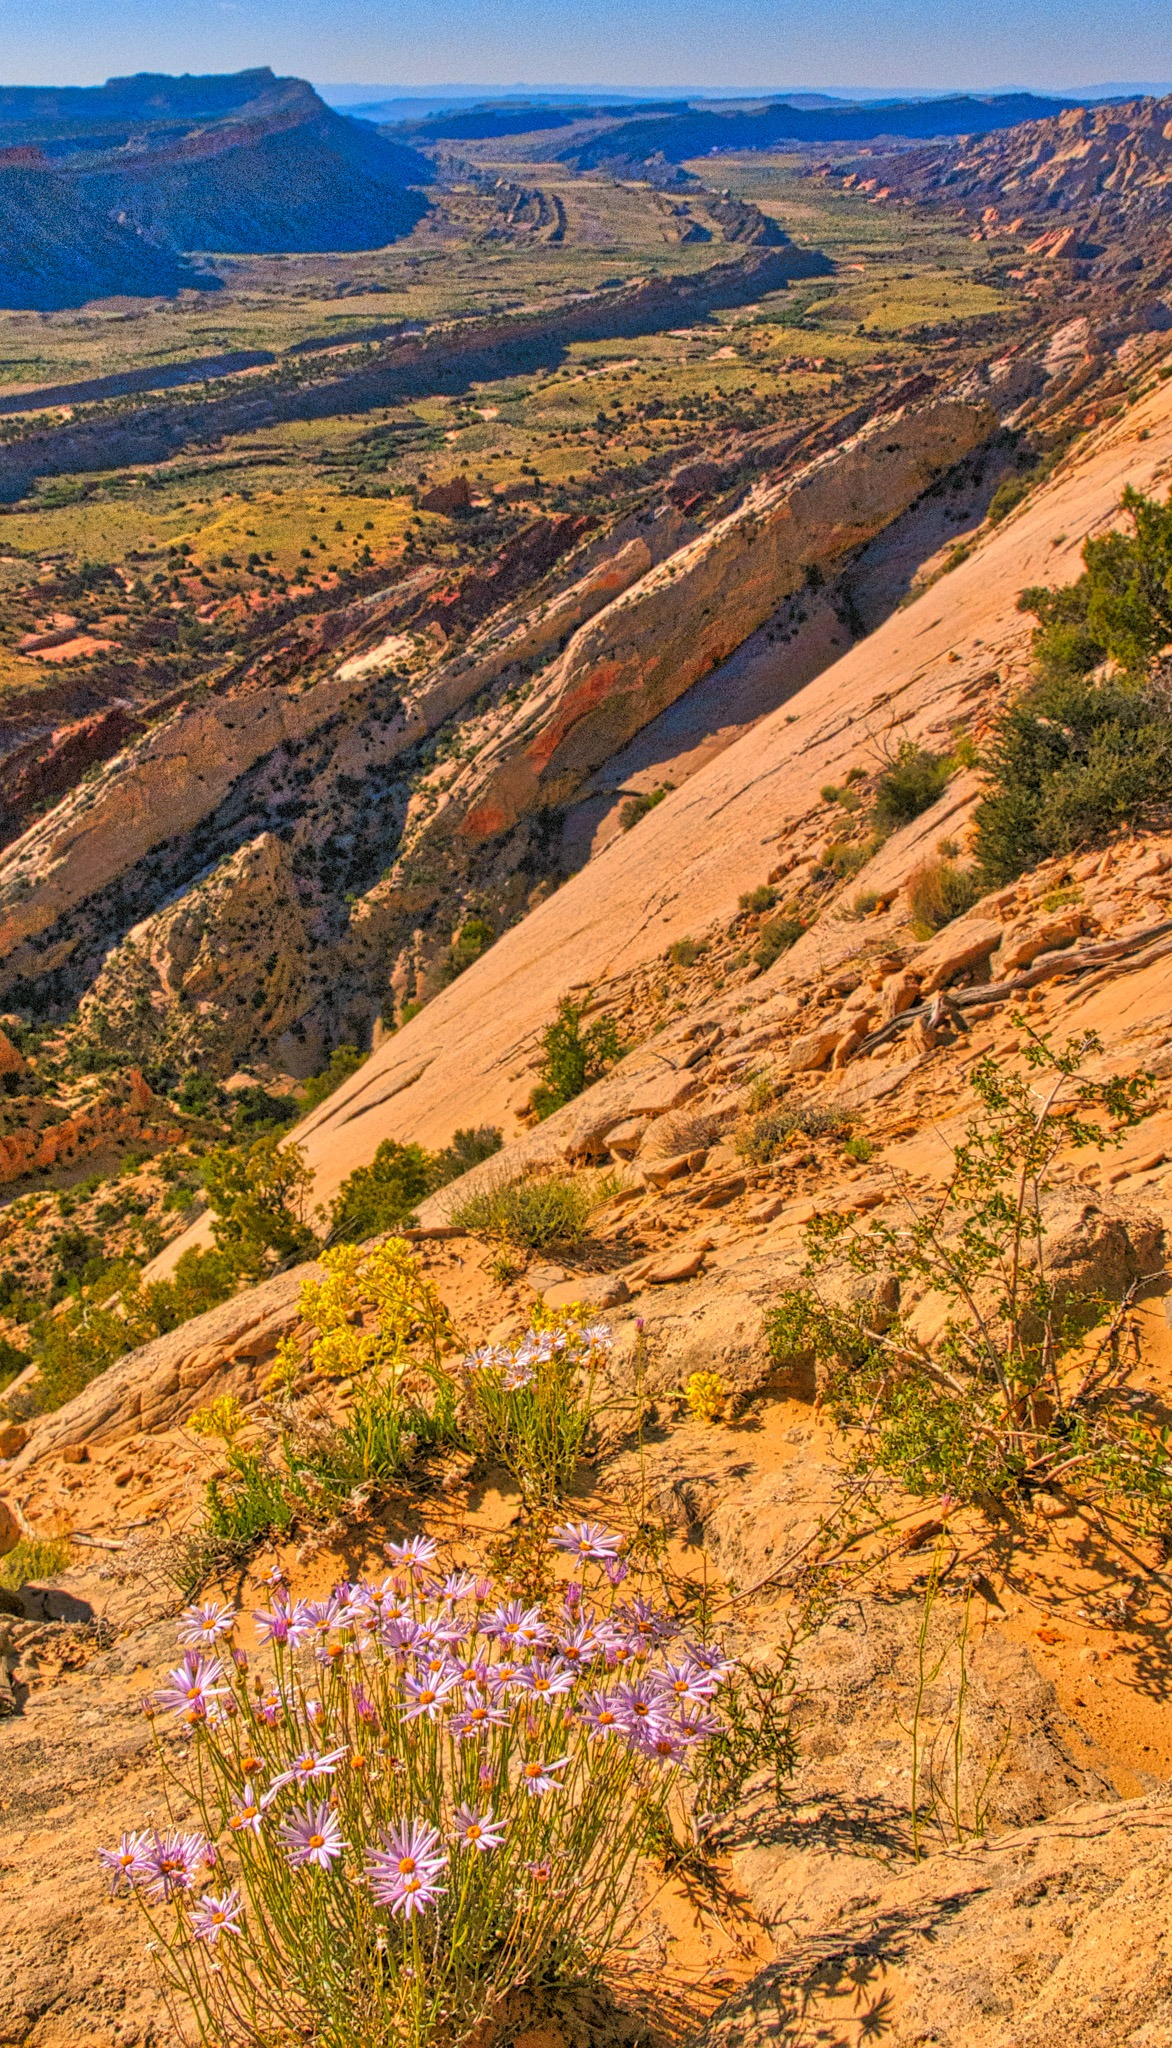 Looking south from Strike Valley Overlook in Capitol Reef National Park, with purple Utah Daisies in the foreground.